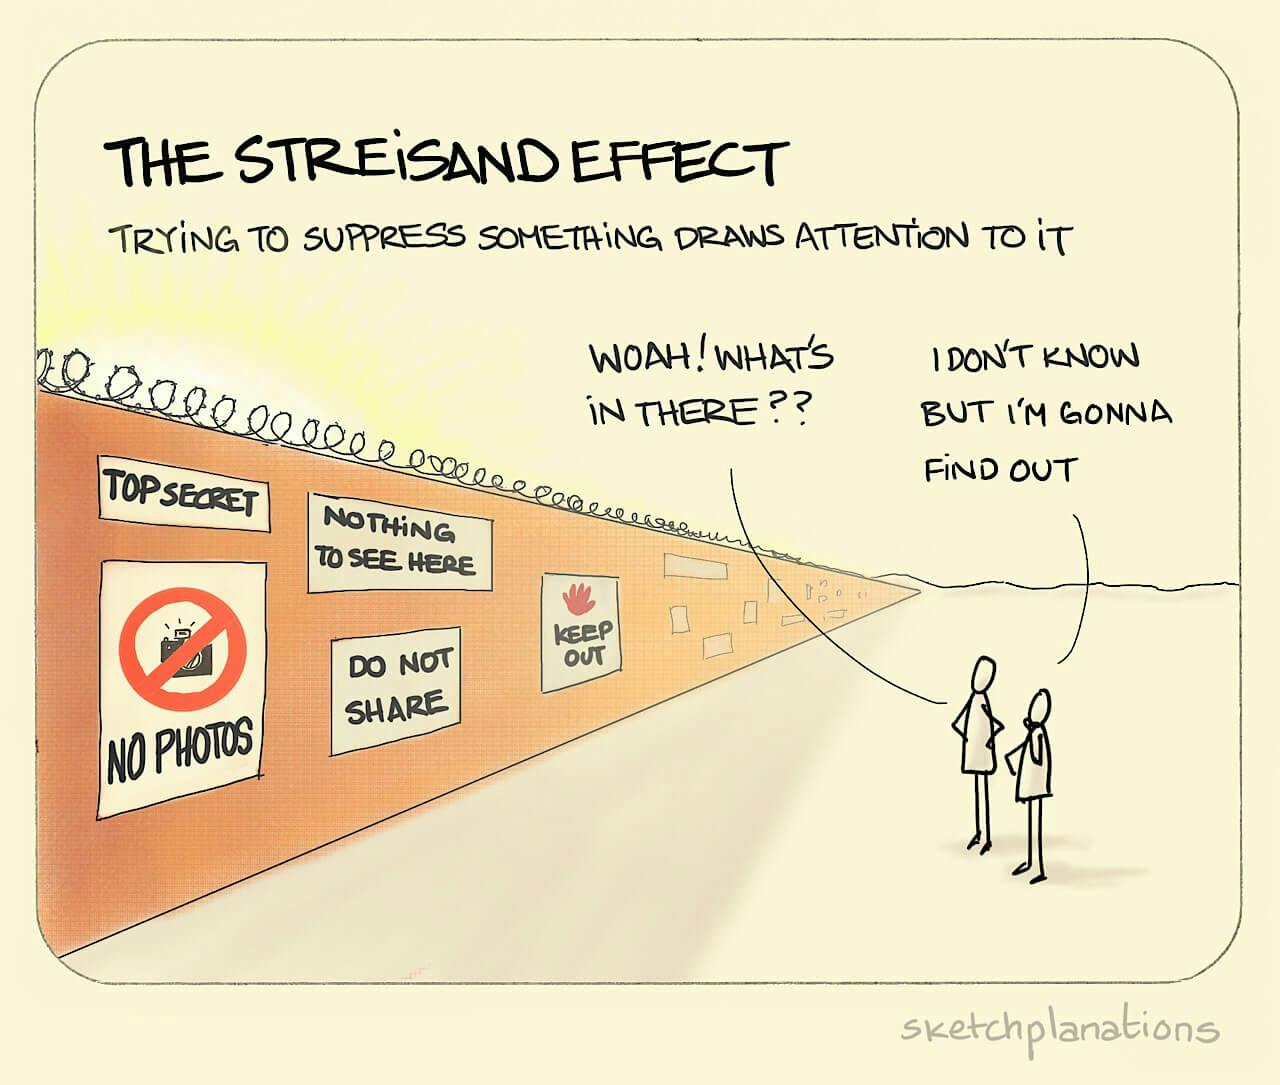 The Streisand Effect - Sketchplanations